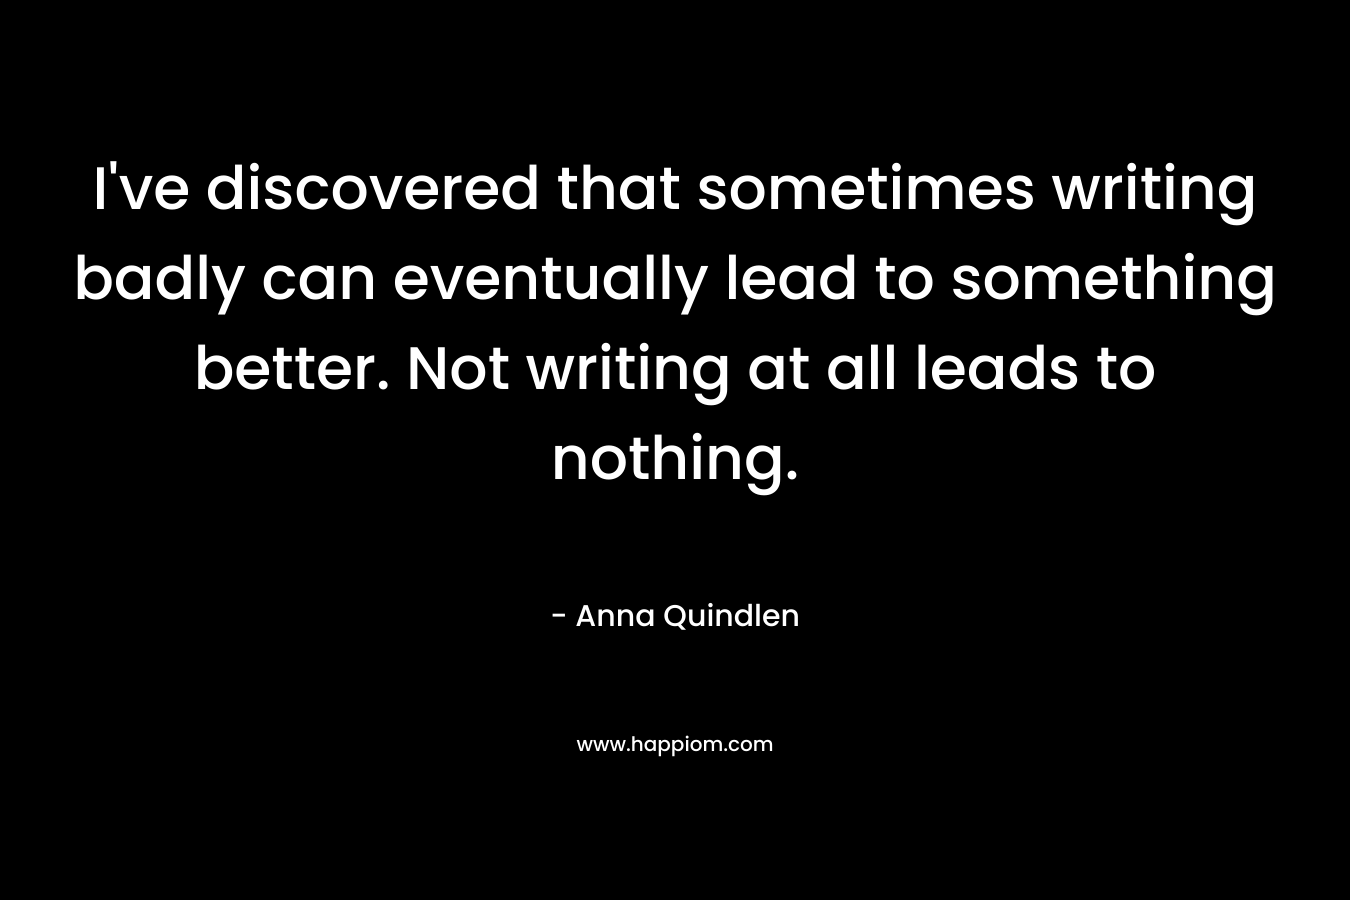 I’ve discovered that sometimes writing badly can eventually lead to something better. Not writing at all leads to nothing. – Anna Quindlen